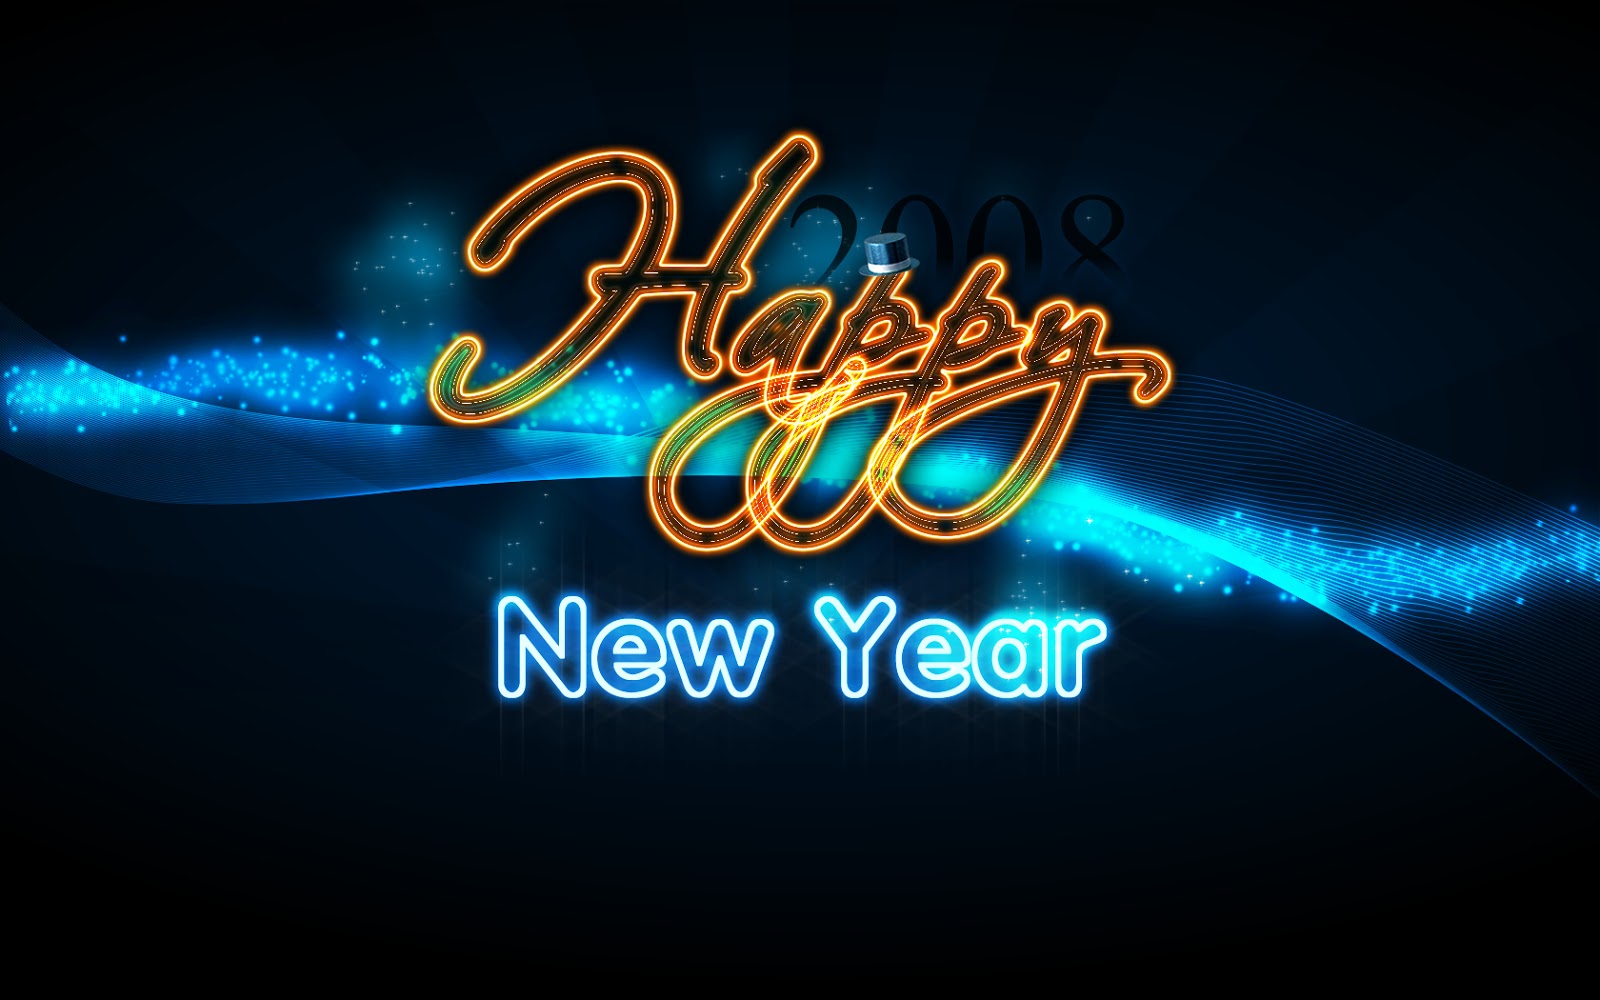 New Year 2016 Wallpapers New Year 2016 Pctures HD Happy New Year 2016